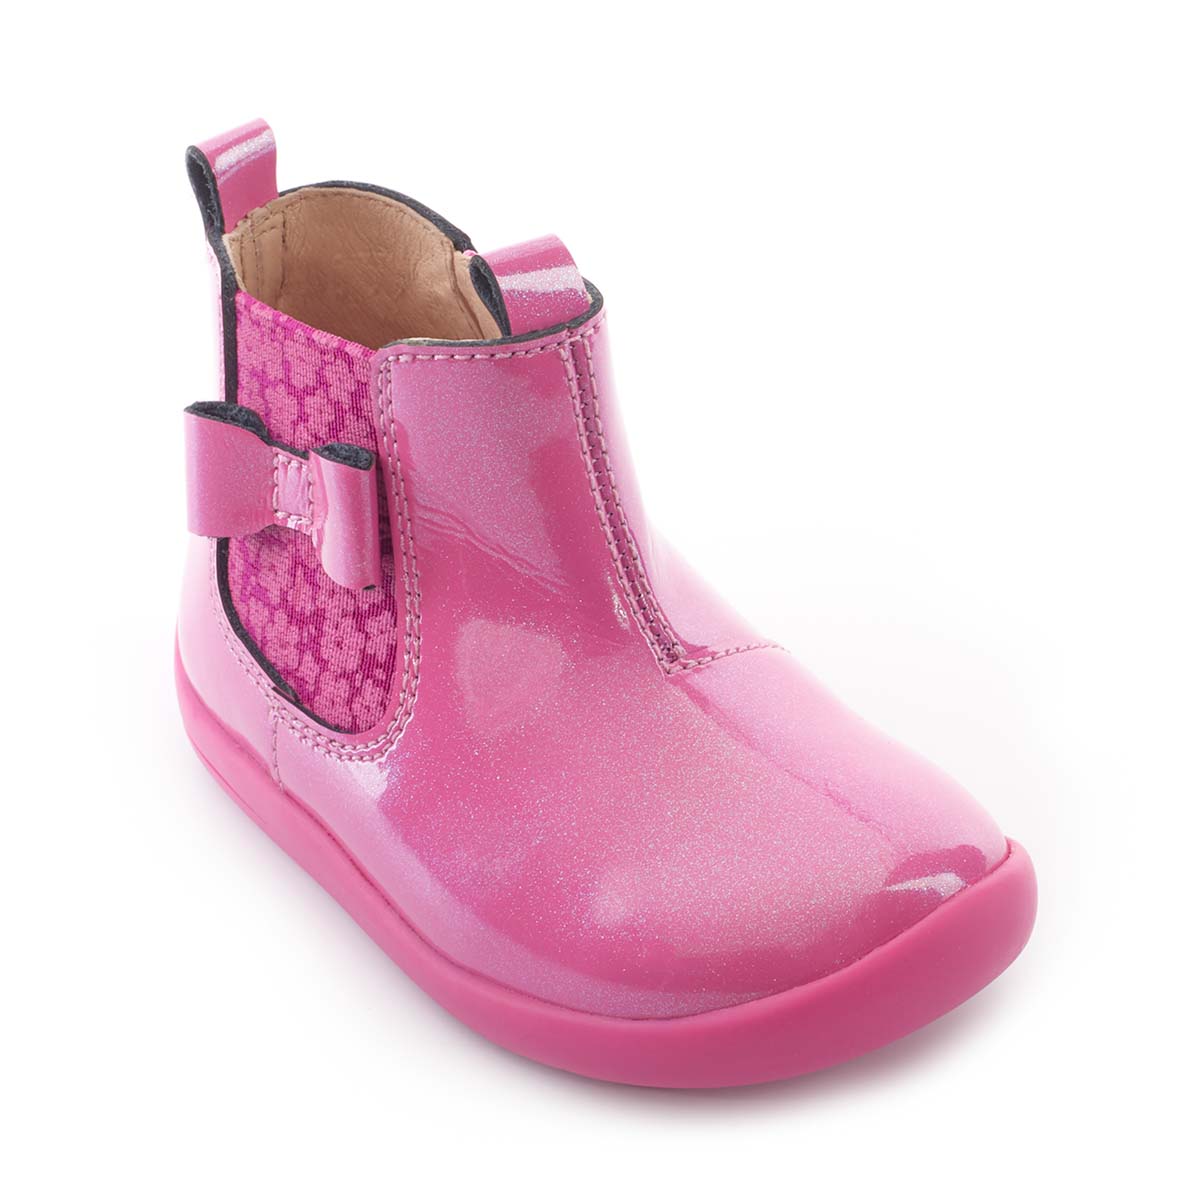 Start Rite - Wonderland Chelsea In Pink 0789-16F In Size 5.5 In Plain Pink Infant Girls Boots  In Pink For kids